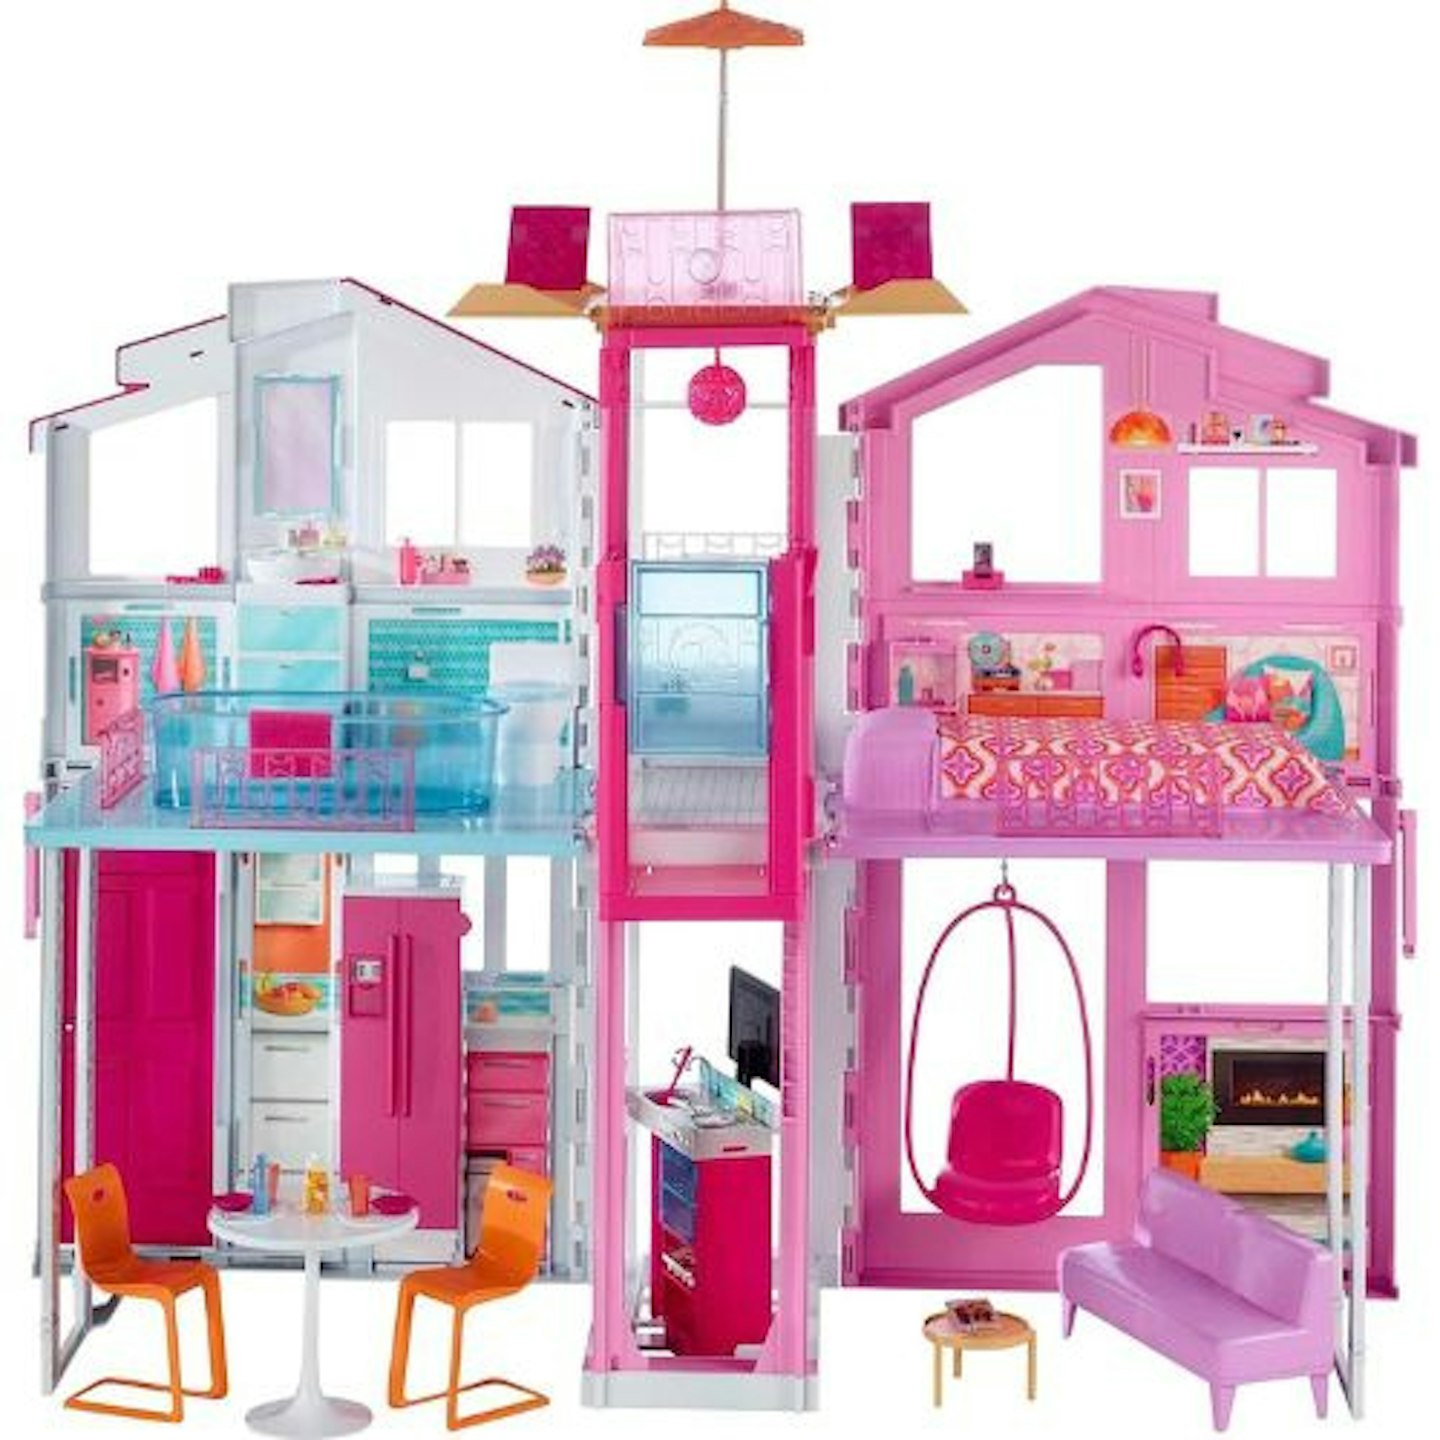 Best Children's Toy : Barbie 3-Story Townhouse Dollhouse with Elevator